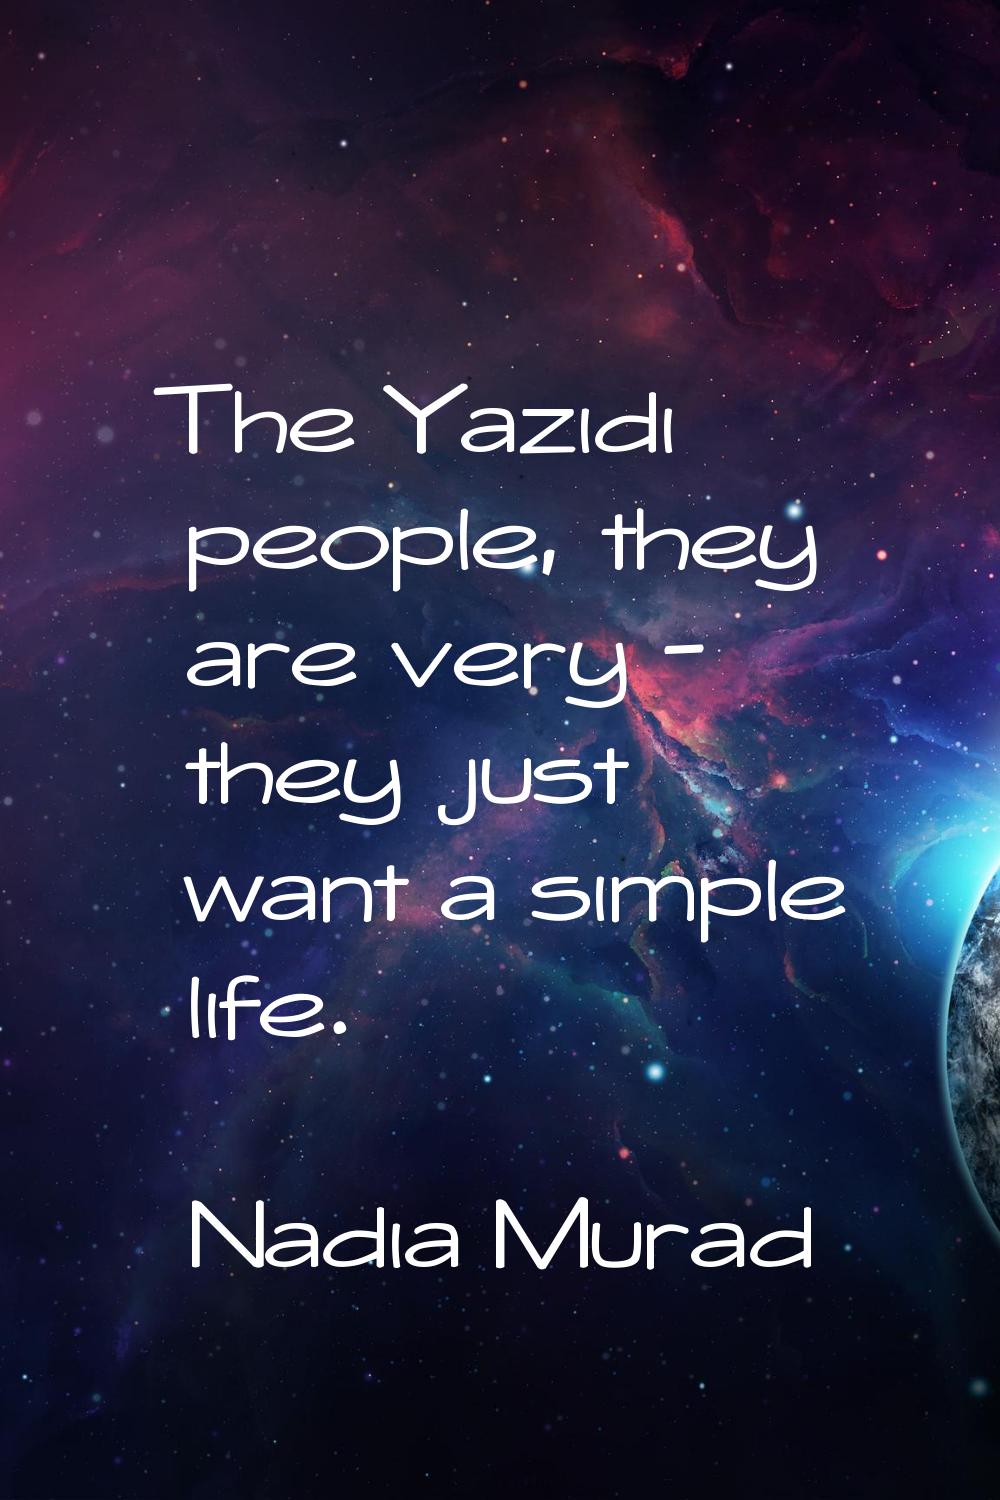 The Yazidi people, they are very - they just want a simple life.